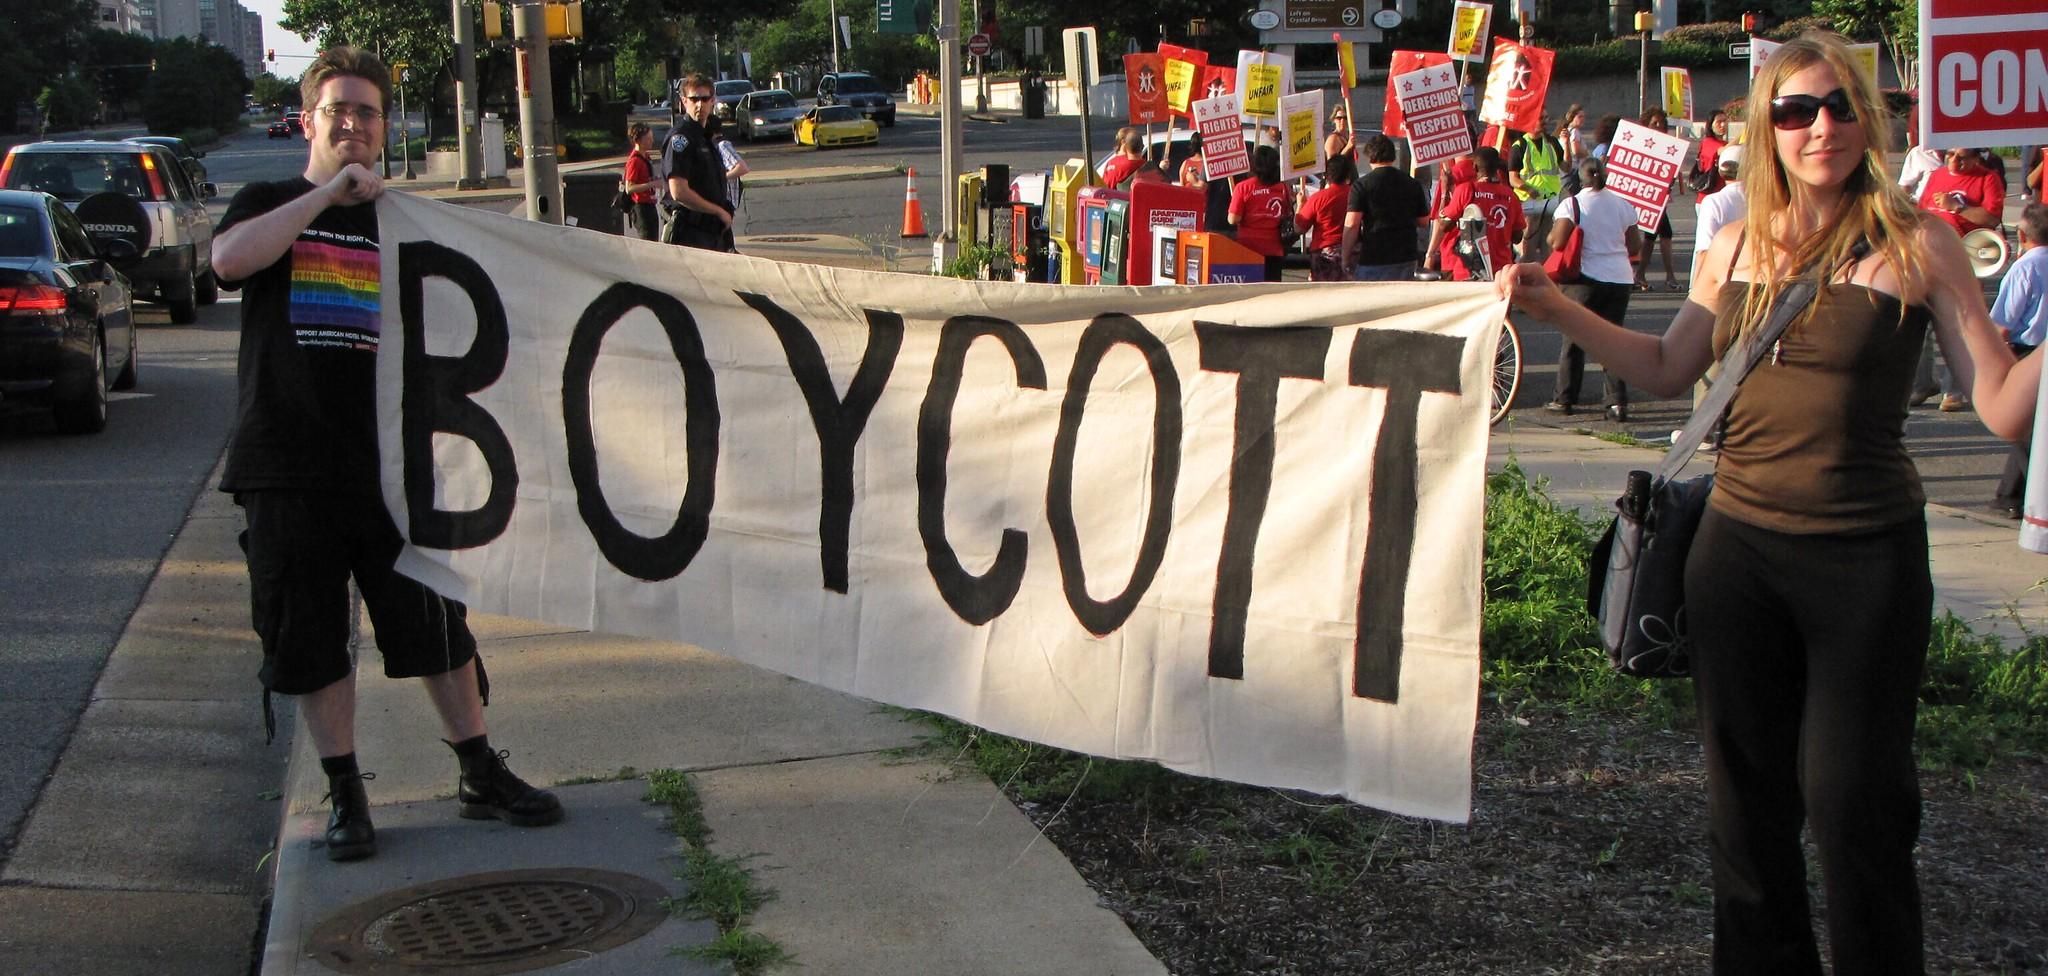 Two people holding a sign that says "Boycott" at a protest